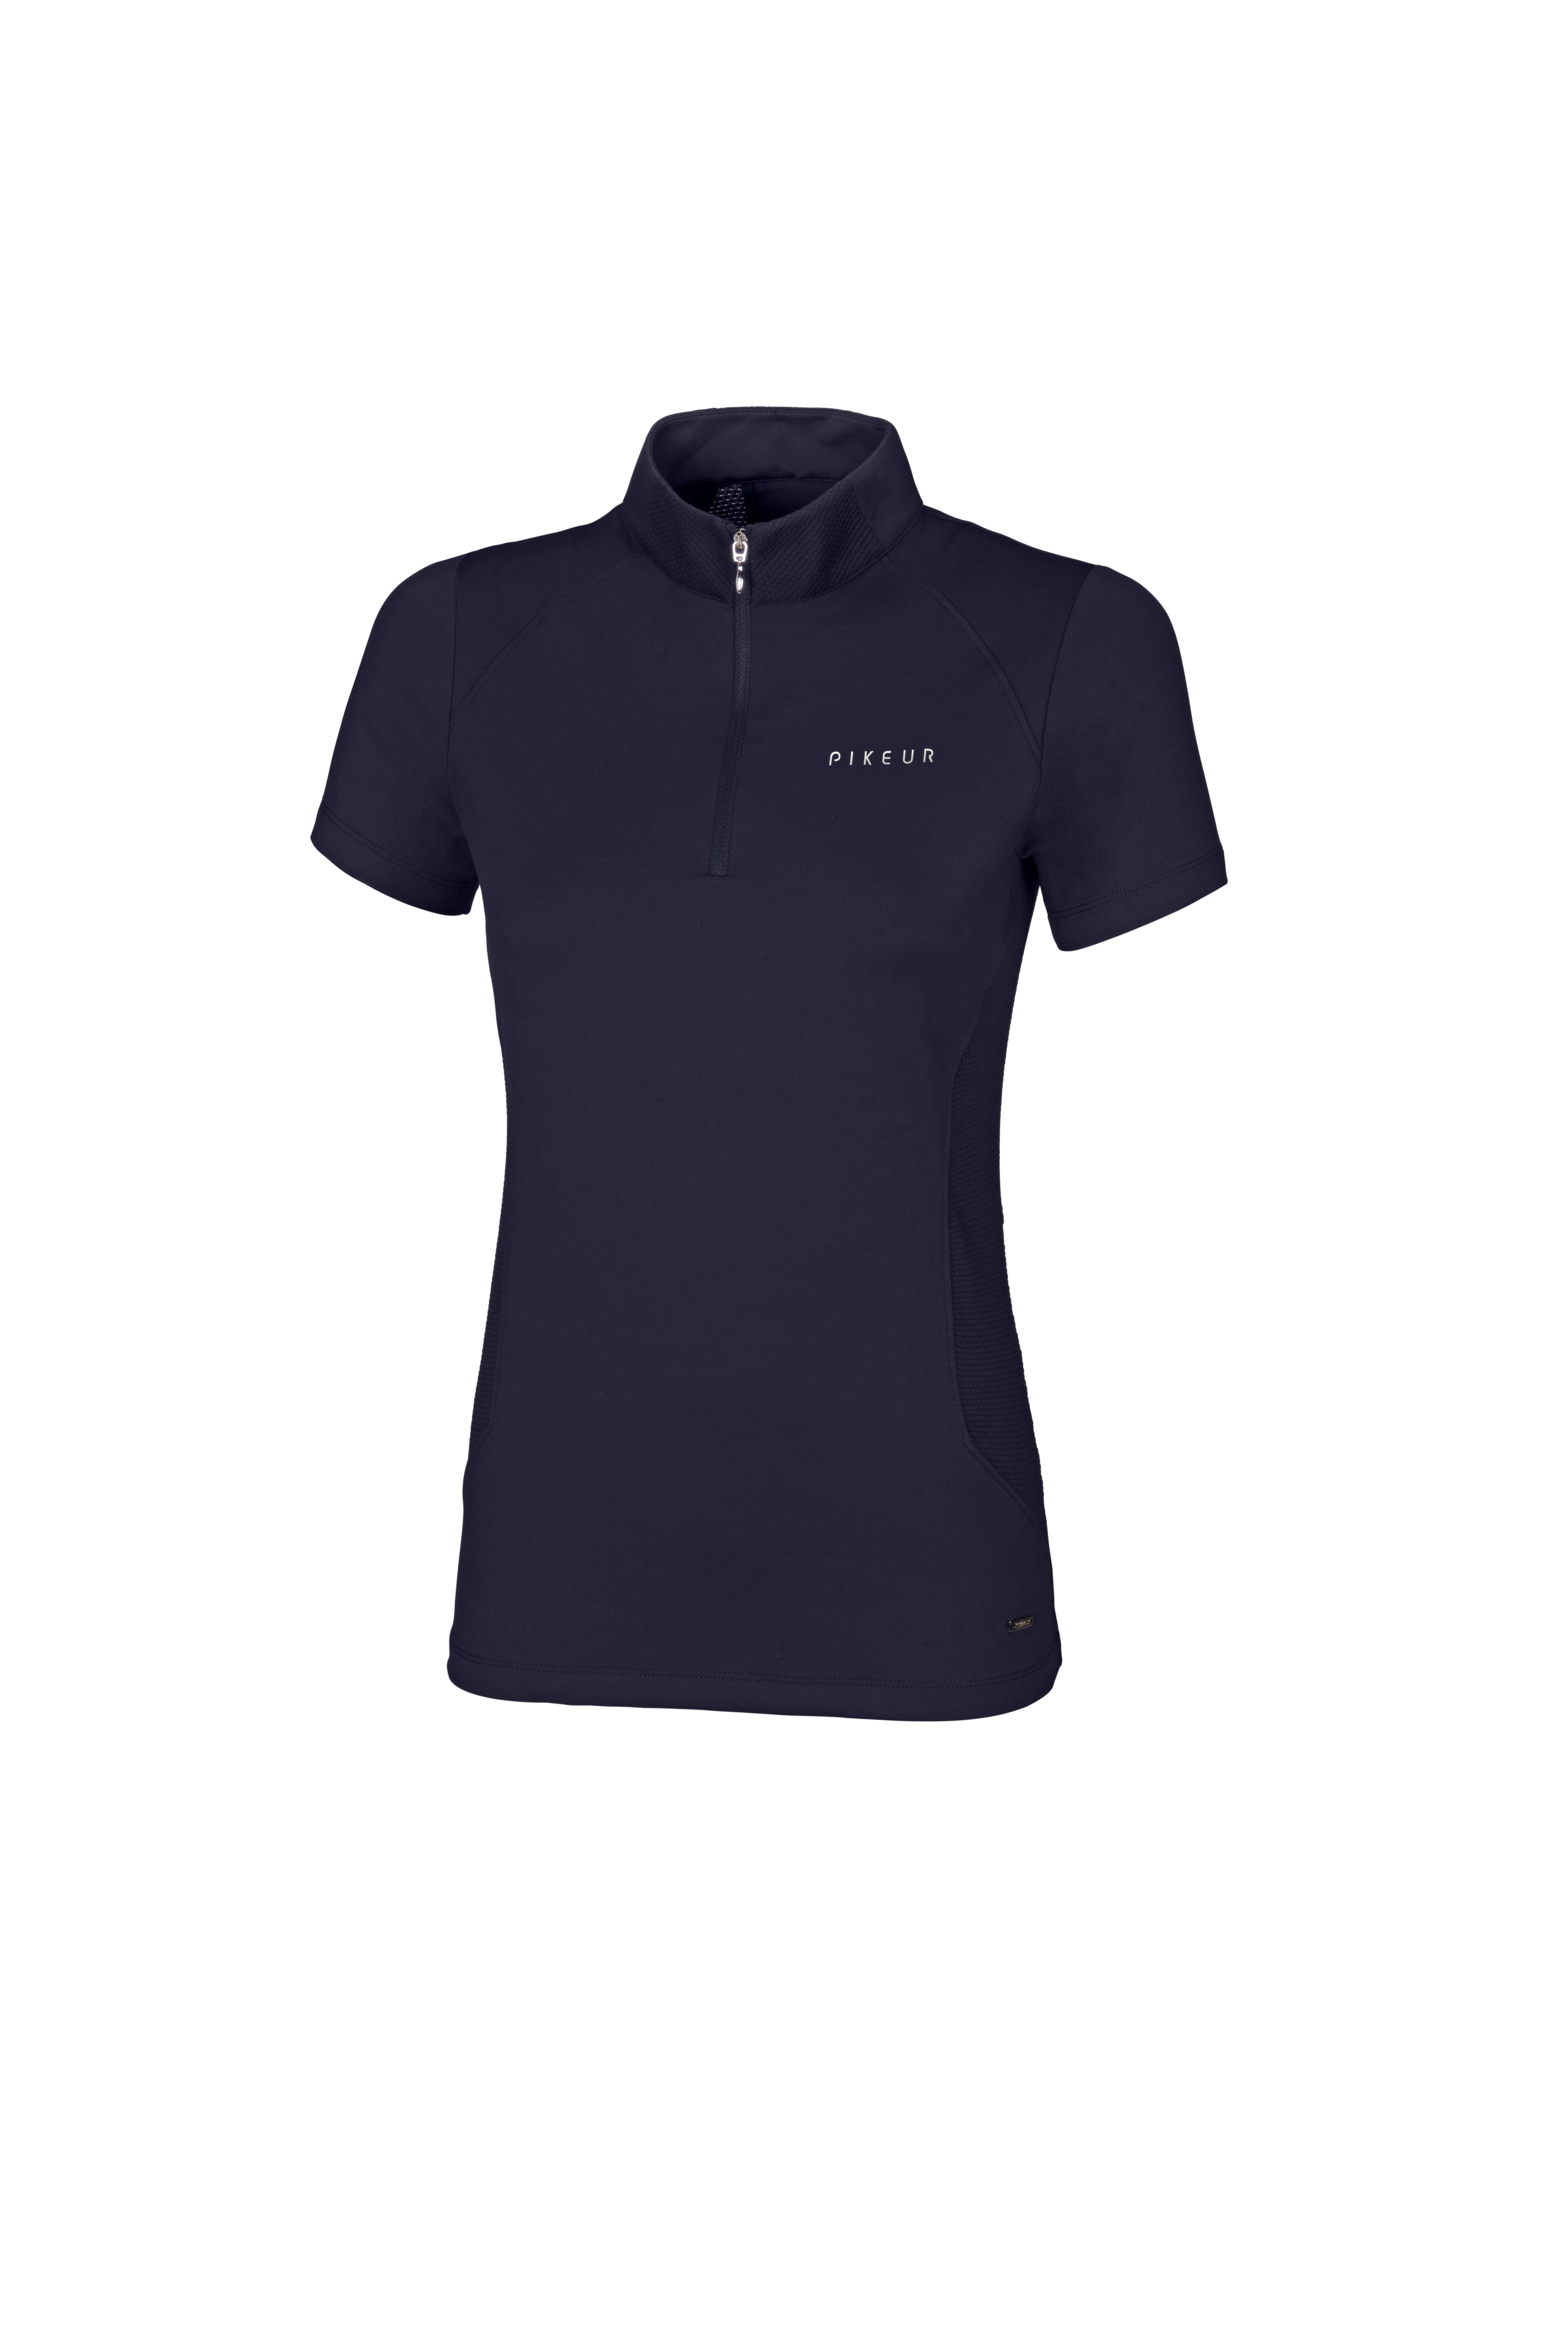 Pikeur Ines Ladies Functional Shirt in Thyme AW19